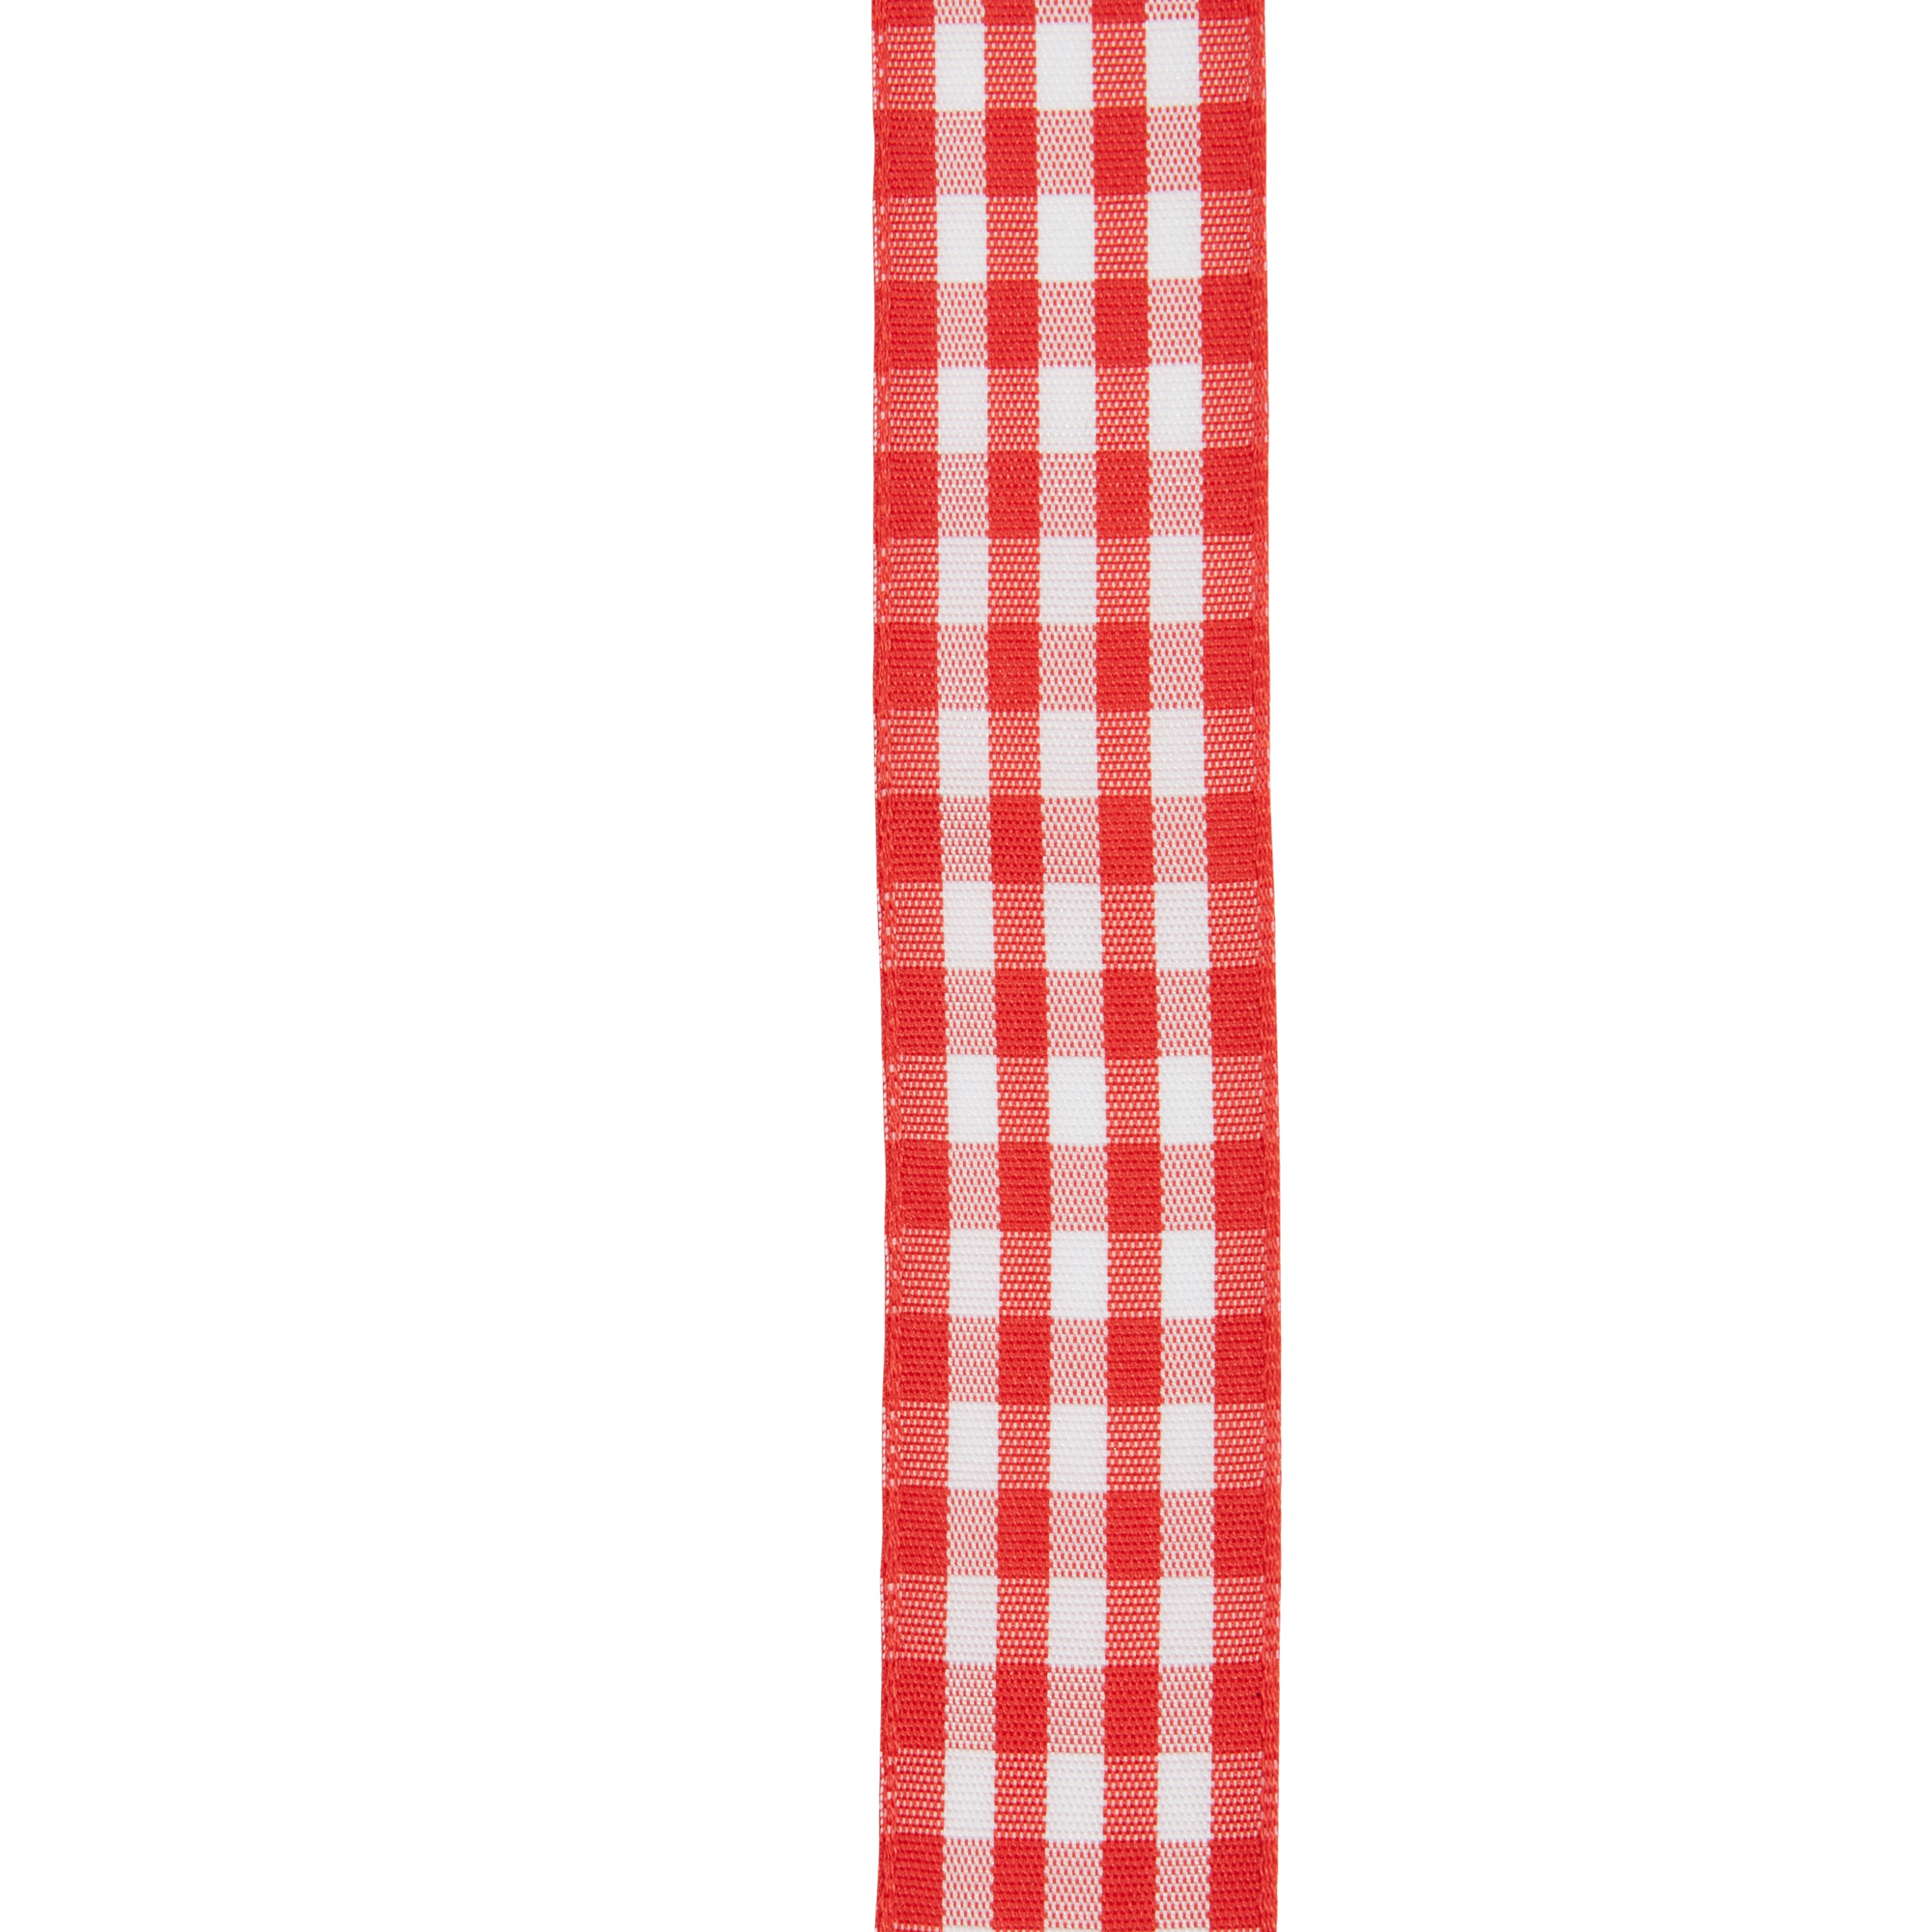 Offray Ribbon, Red 7/8 inch Gingham Check Woven Ribbon, 9 feet 